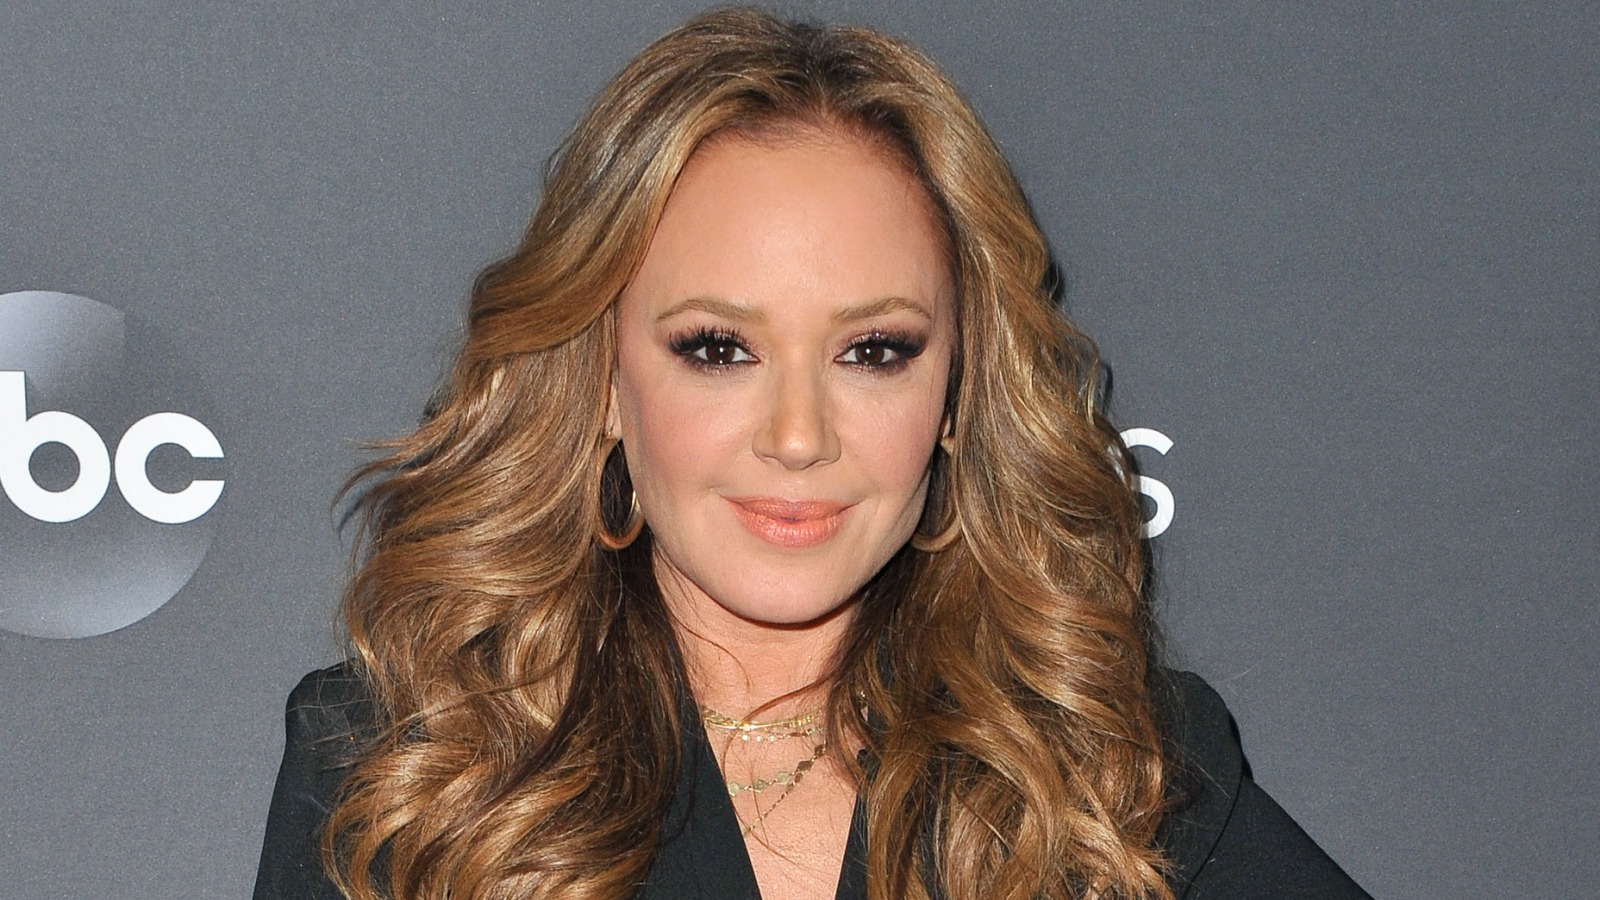 Leah Remini Net Worth - From "The King Of Queens" To Activism